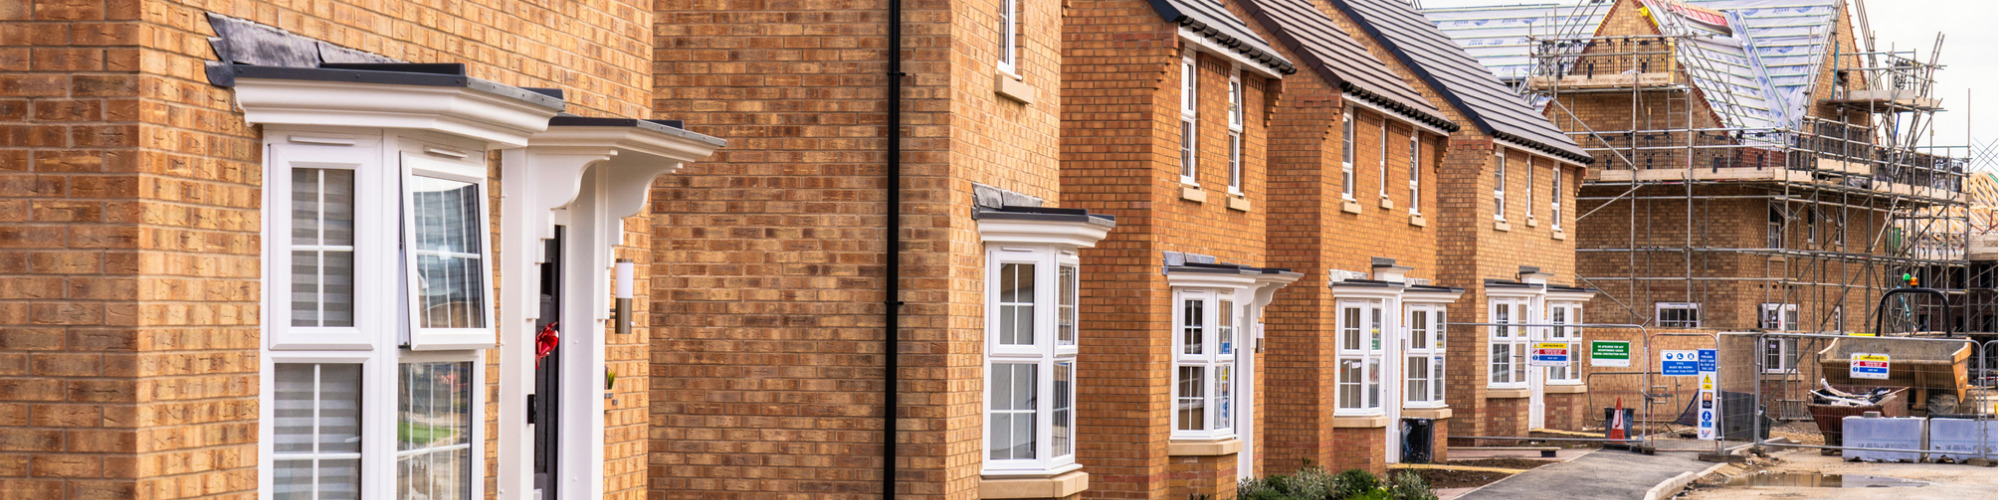 CIL & Con29R (Local Search) Enquiries - The Key Issues for Residential Conveyancers